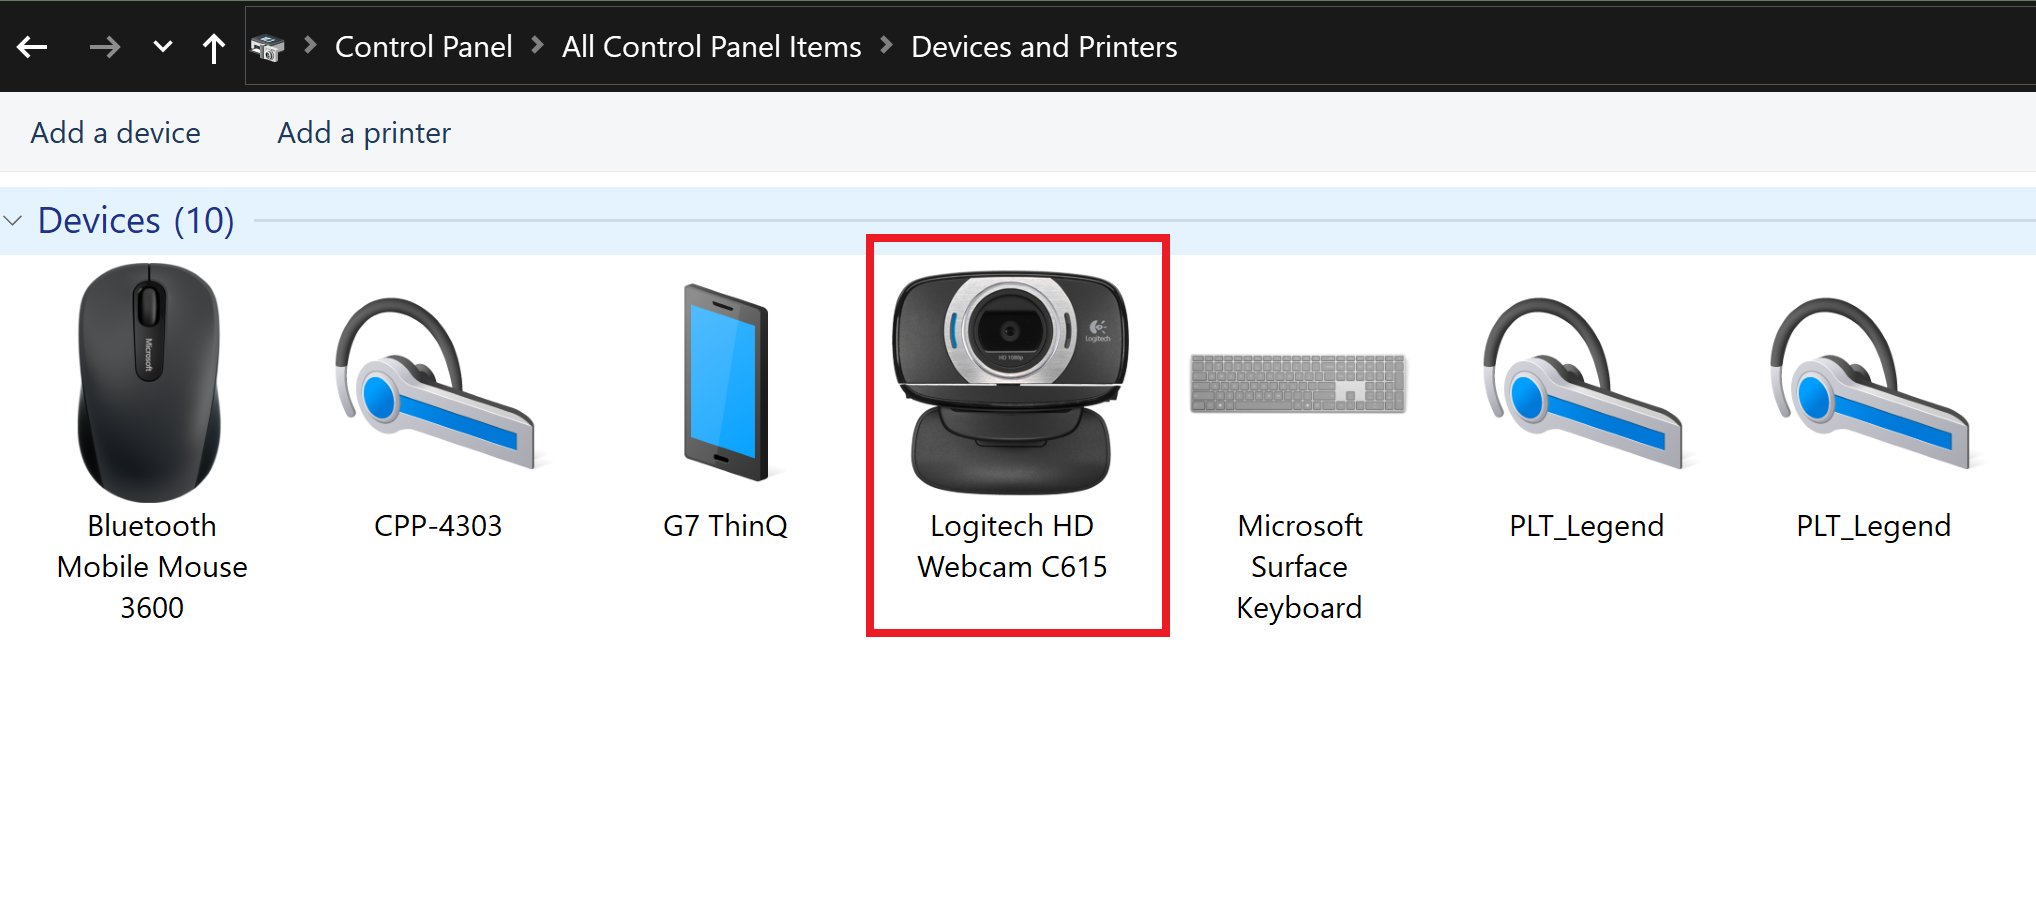 Logitech Webcam C615 Does Not Work with Surface Book 3 - Microsoft Community